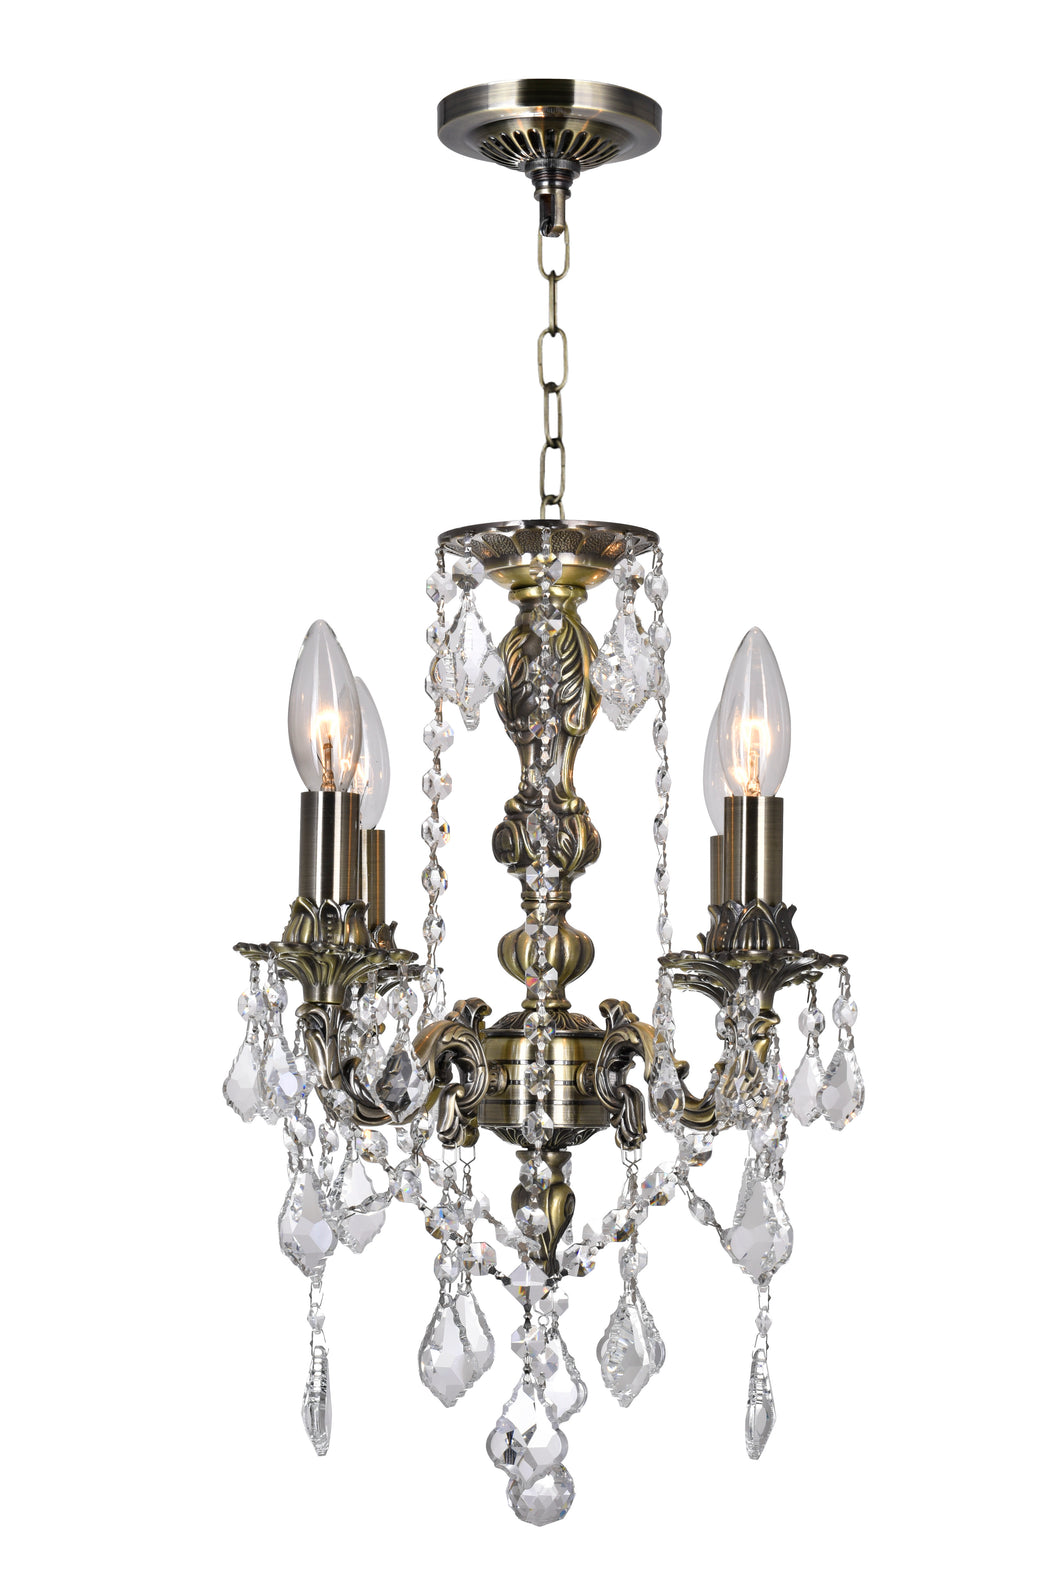 4 Light Up Chandelier with Antique Brass finish